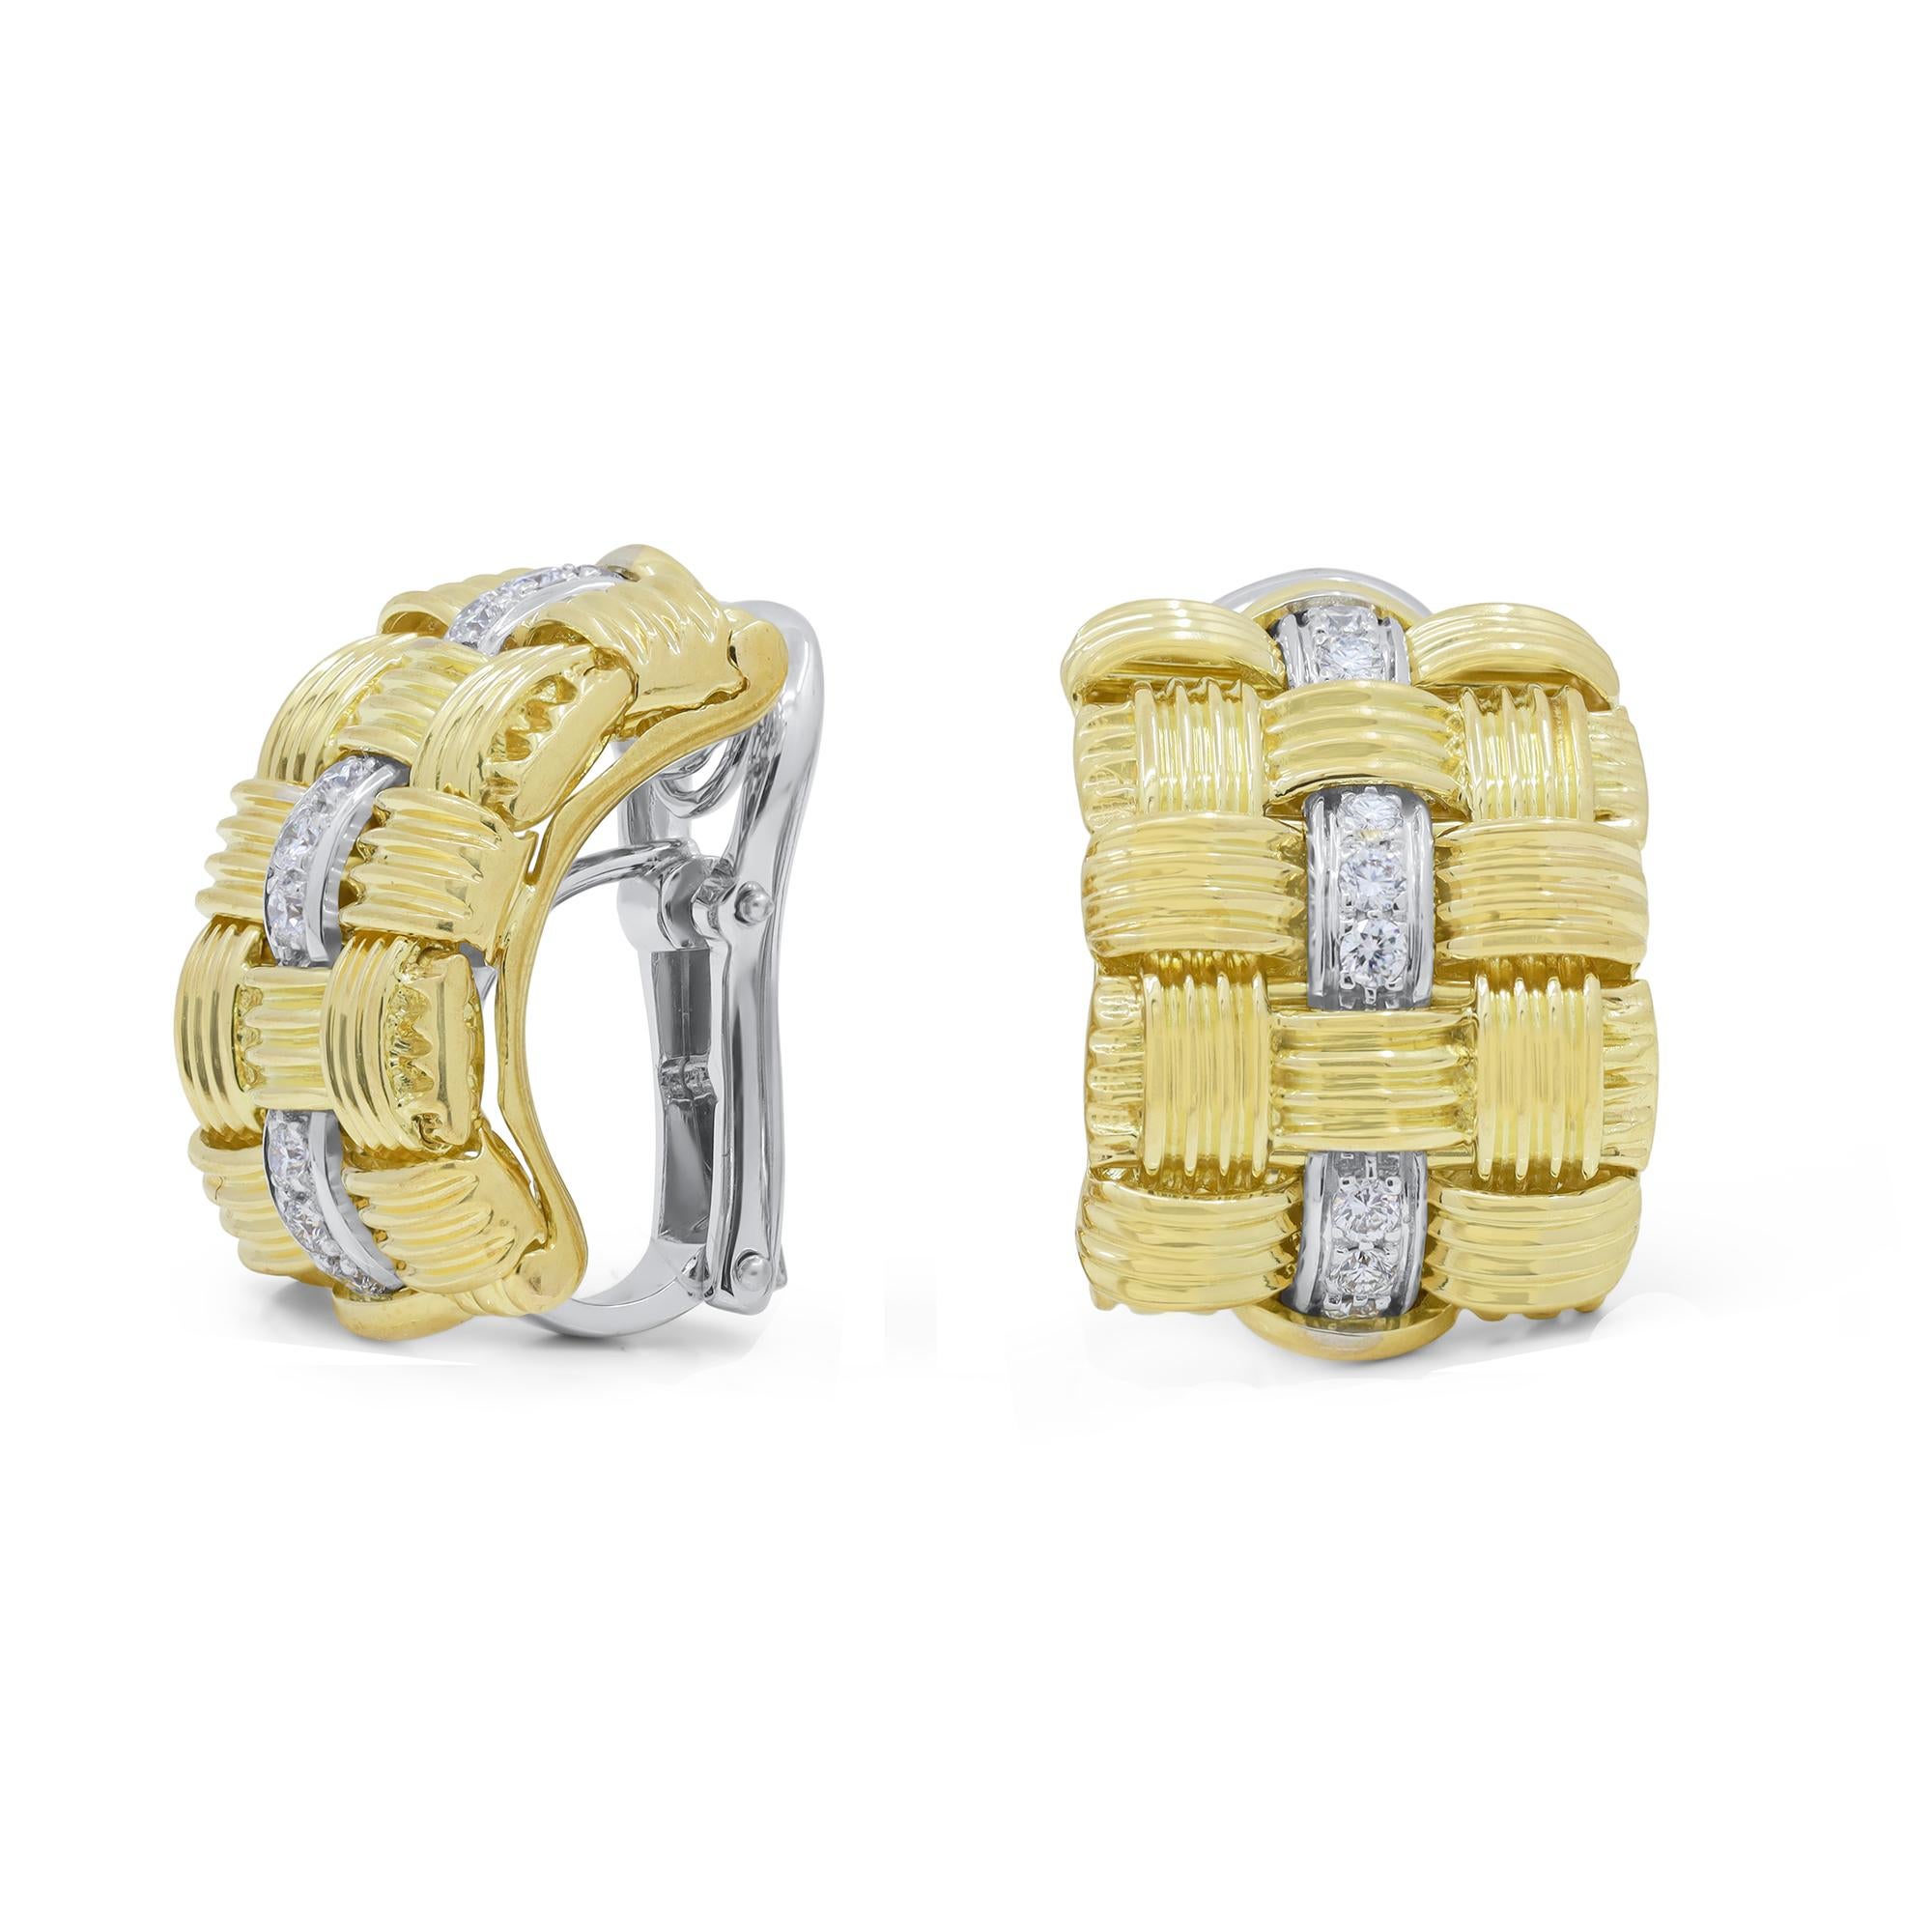 Diana M. 18kt Yellow Gold Woven Earrings Roberto Coin designer 

Diana M. is a leading supplier of top-quality fine jewelry for over 35 years.
Diana M is one-stop shop for all your jewelry shopping, carrying line of diamond rings, earrings,